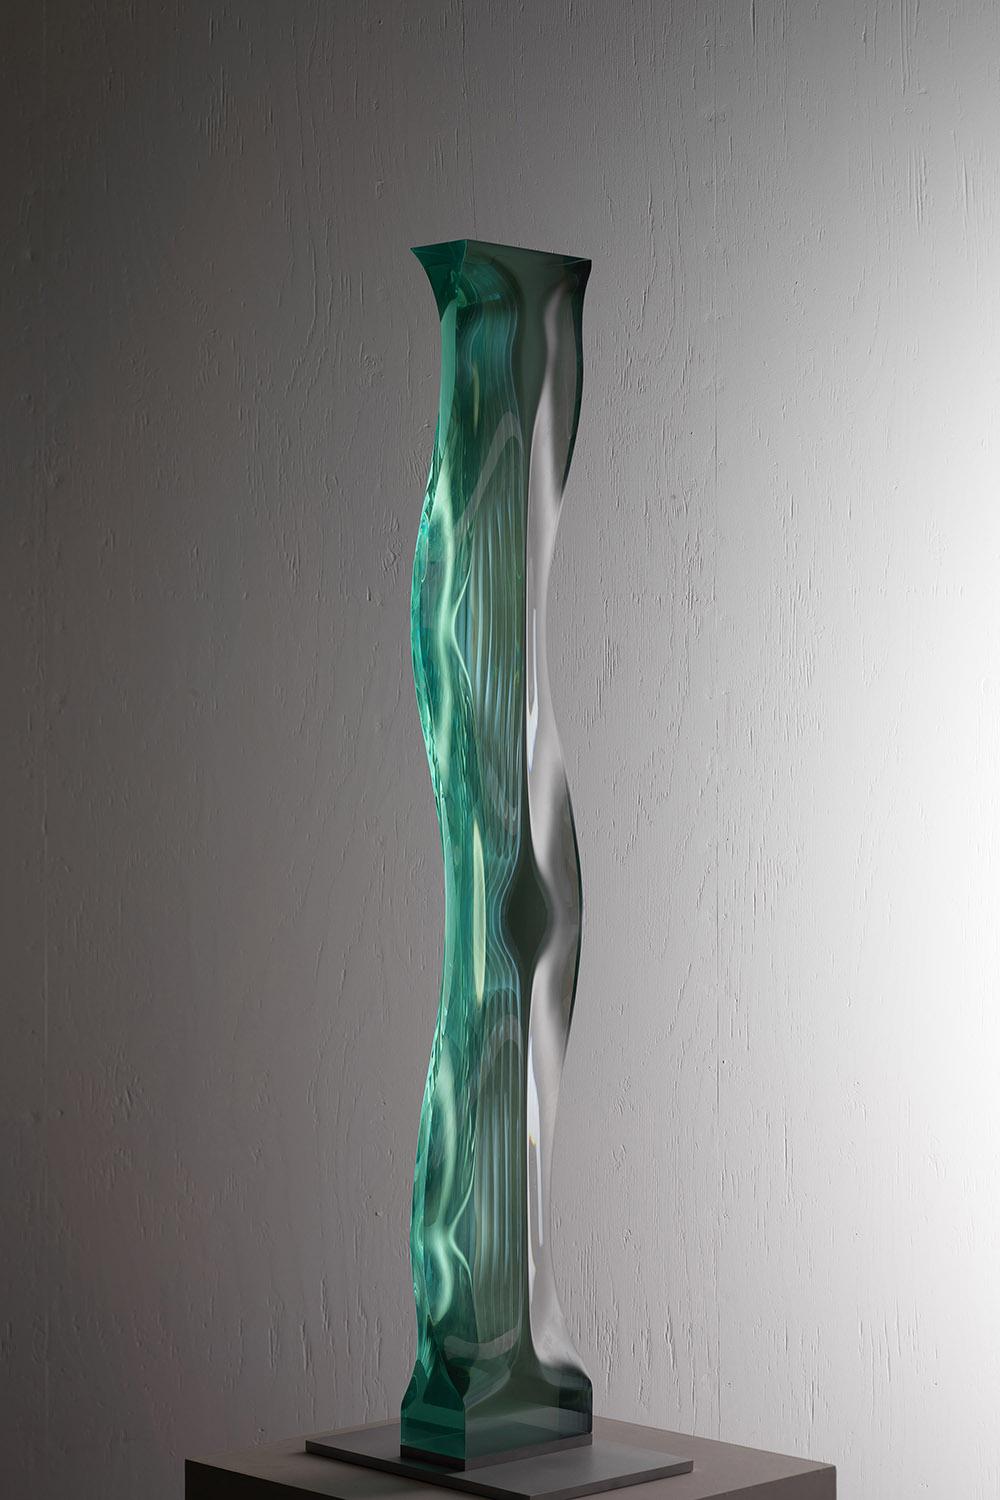 M.080601 by Toshio Iezumi - Glass, Vertical abstract sculpture, column / totem